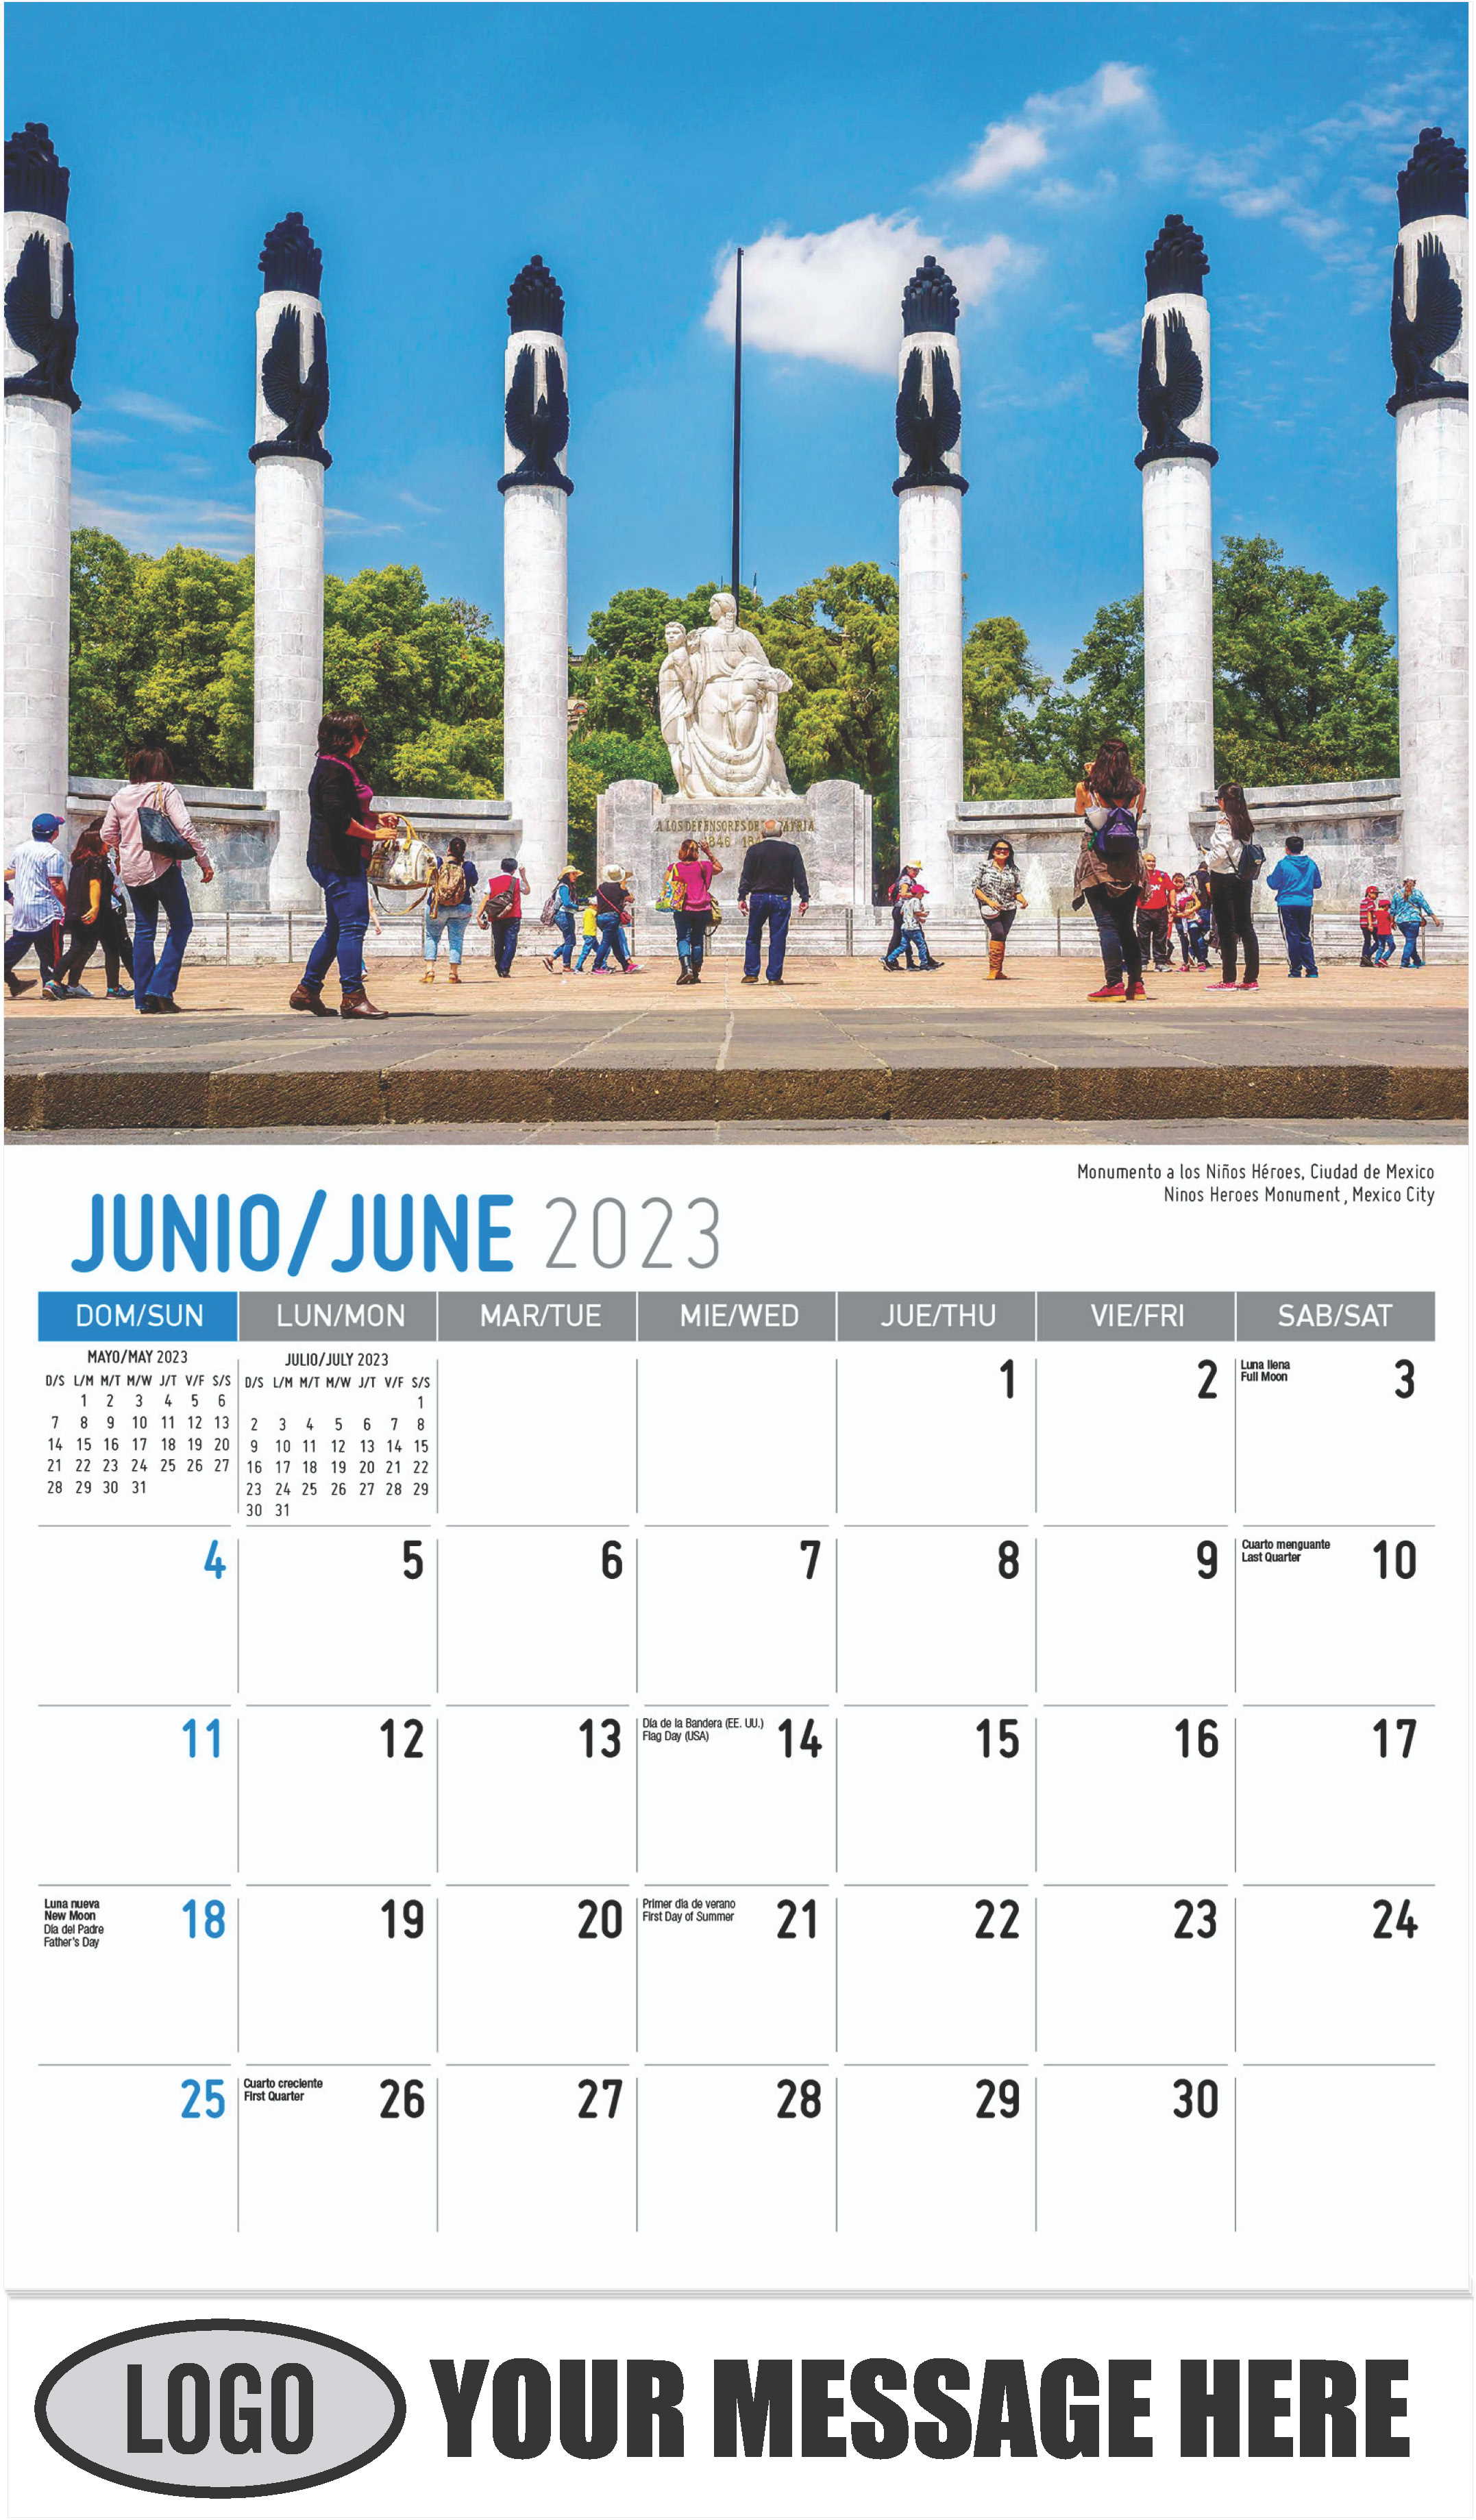 Ninos Heroes Monument¸ Mexico City - June - Scenes of Mexico (Spanish-English bilingual) 2023 Promotional Calendar